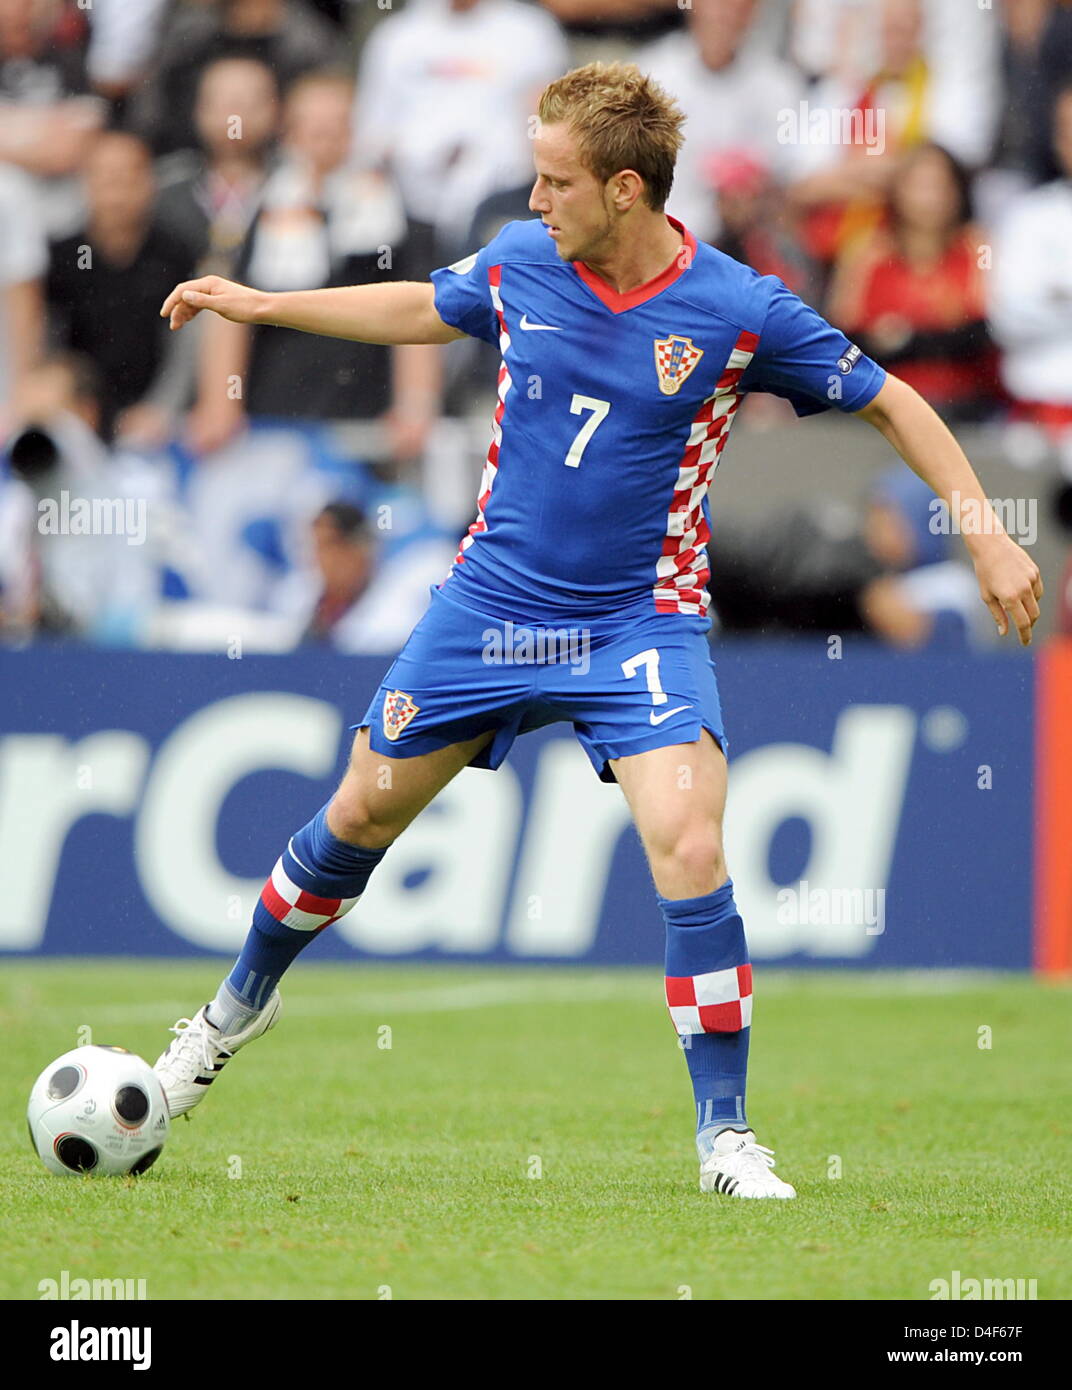 Croatian Ivan Rakitic plays the ball during the EURO 2008 preliminary round group B soccer match between Croatia and Germany at the Woerthersee stadium in Klagenfurt, Austria, 12 June 2008. Croatia won 2-1. Photo: Achim Scheidemann dpa +PLEASE NOTE UEFA RESTRICTIONS PARTICULARLY IN REGARD TO SLIDE SHOWS AND ÒNO MOBILE SERVICESÒ+ +++###dpa###+++ Stock Photo